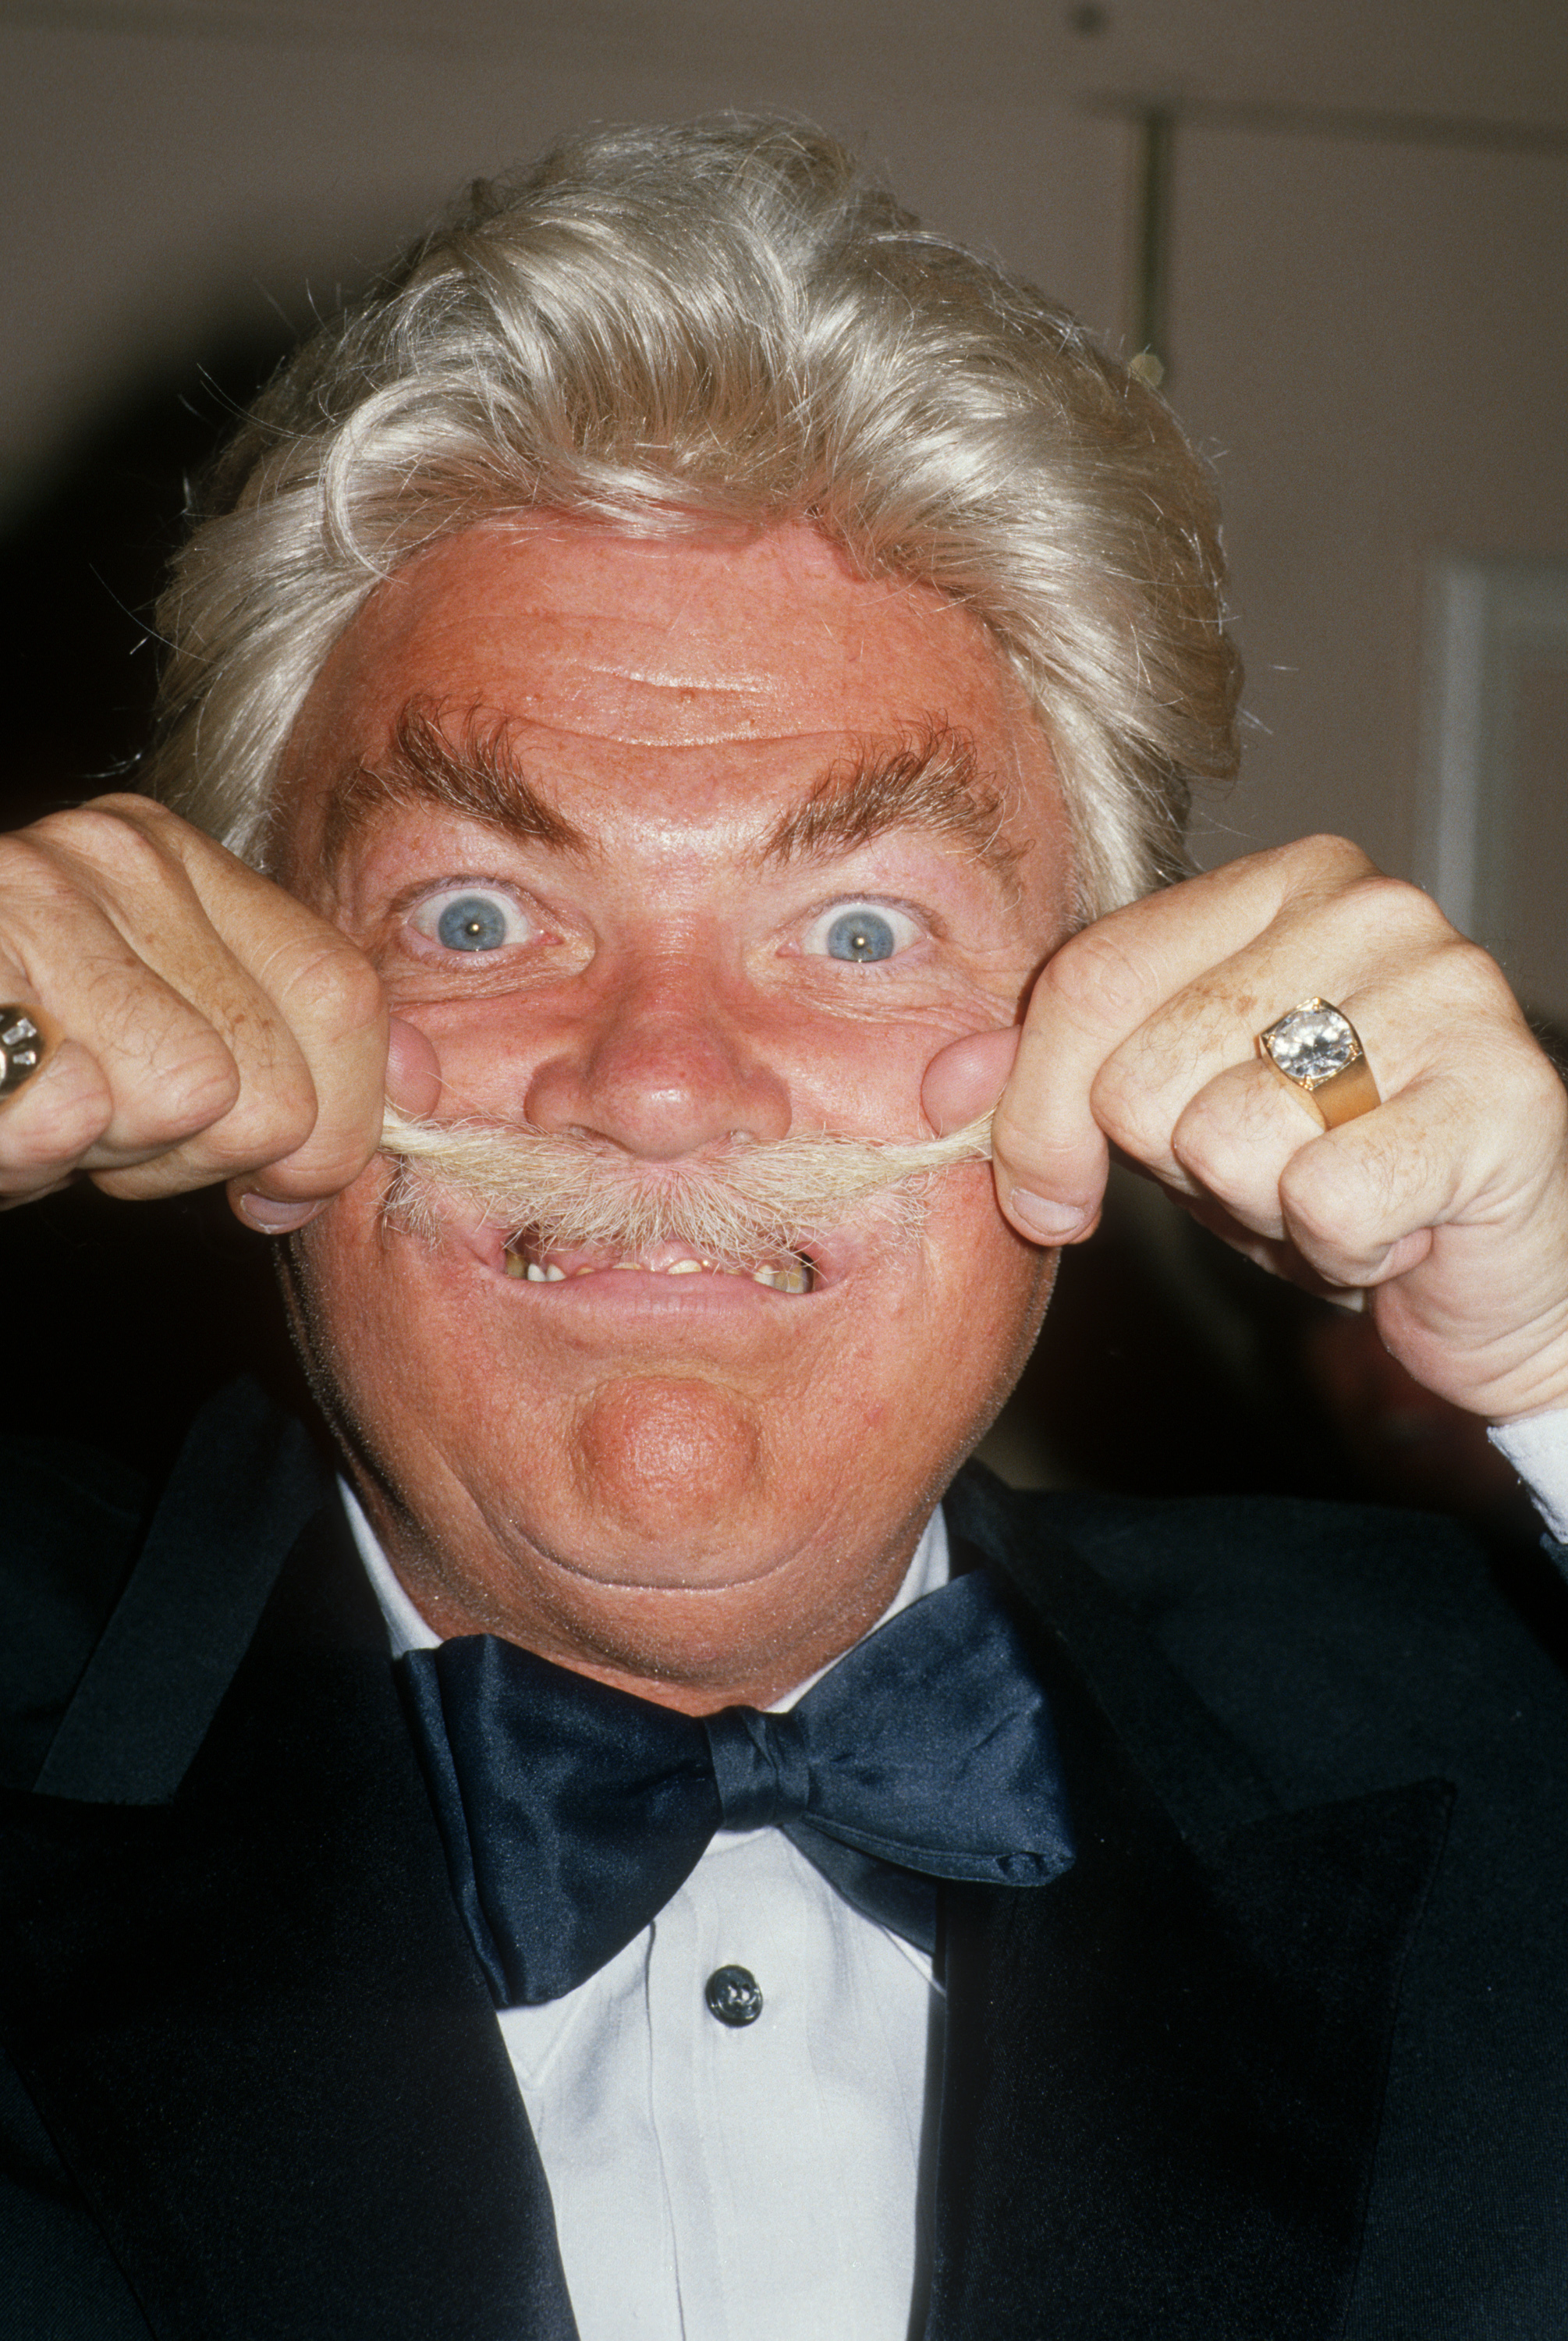 Rip Taylor's funniest moments in photos